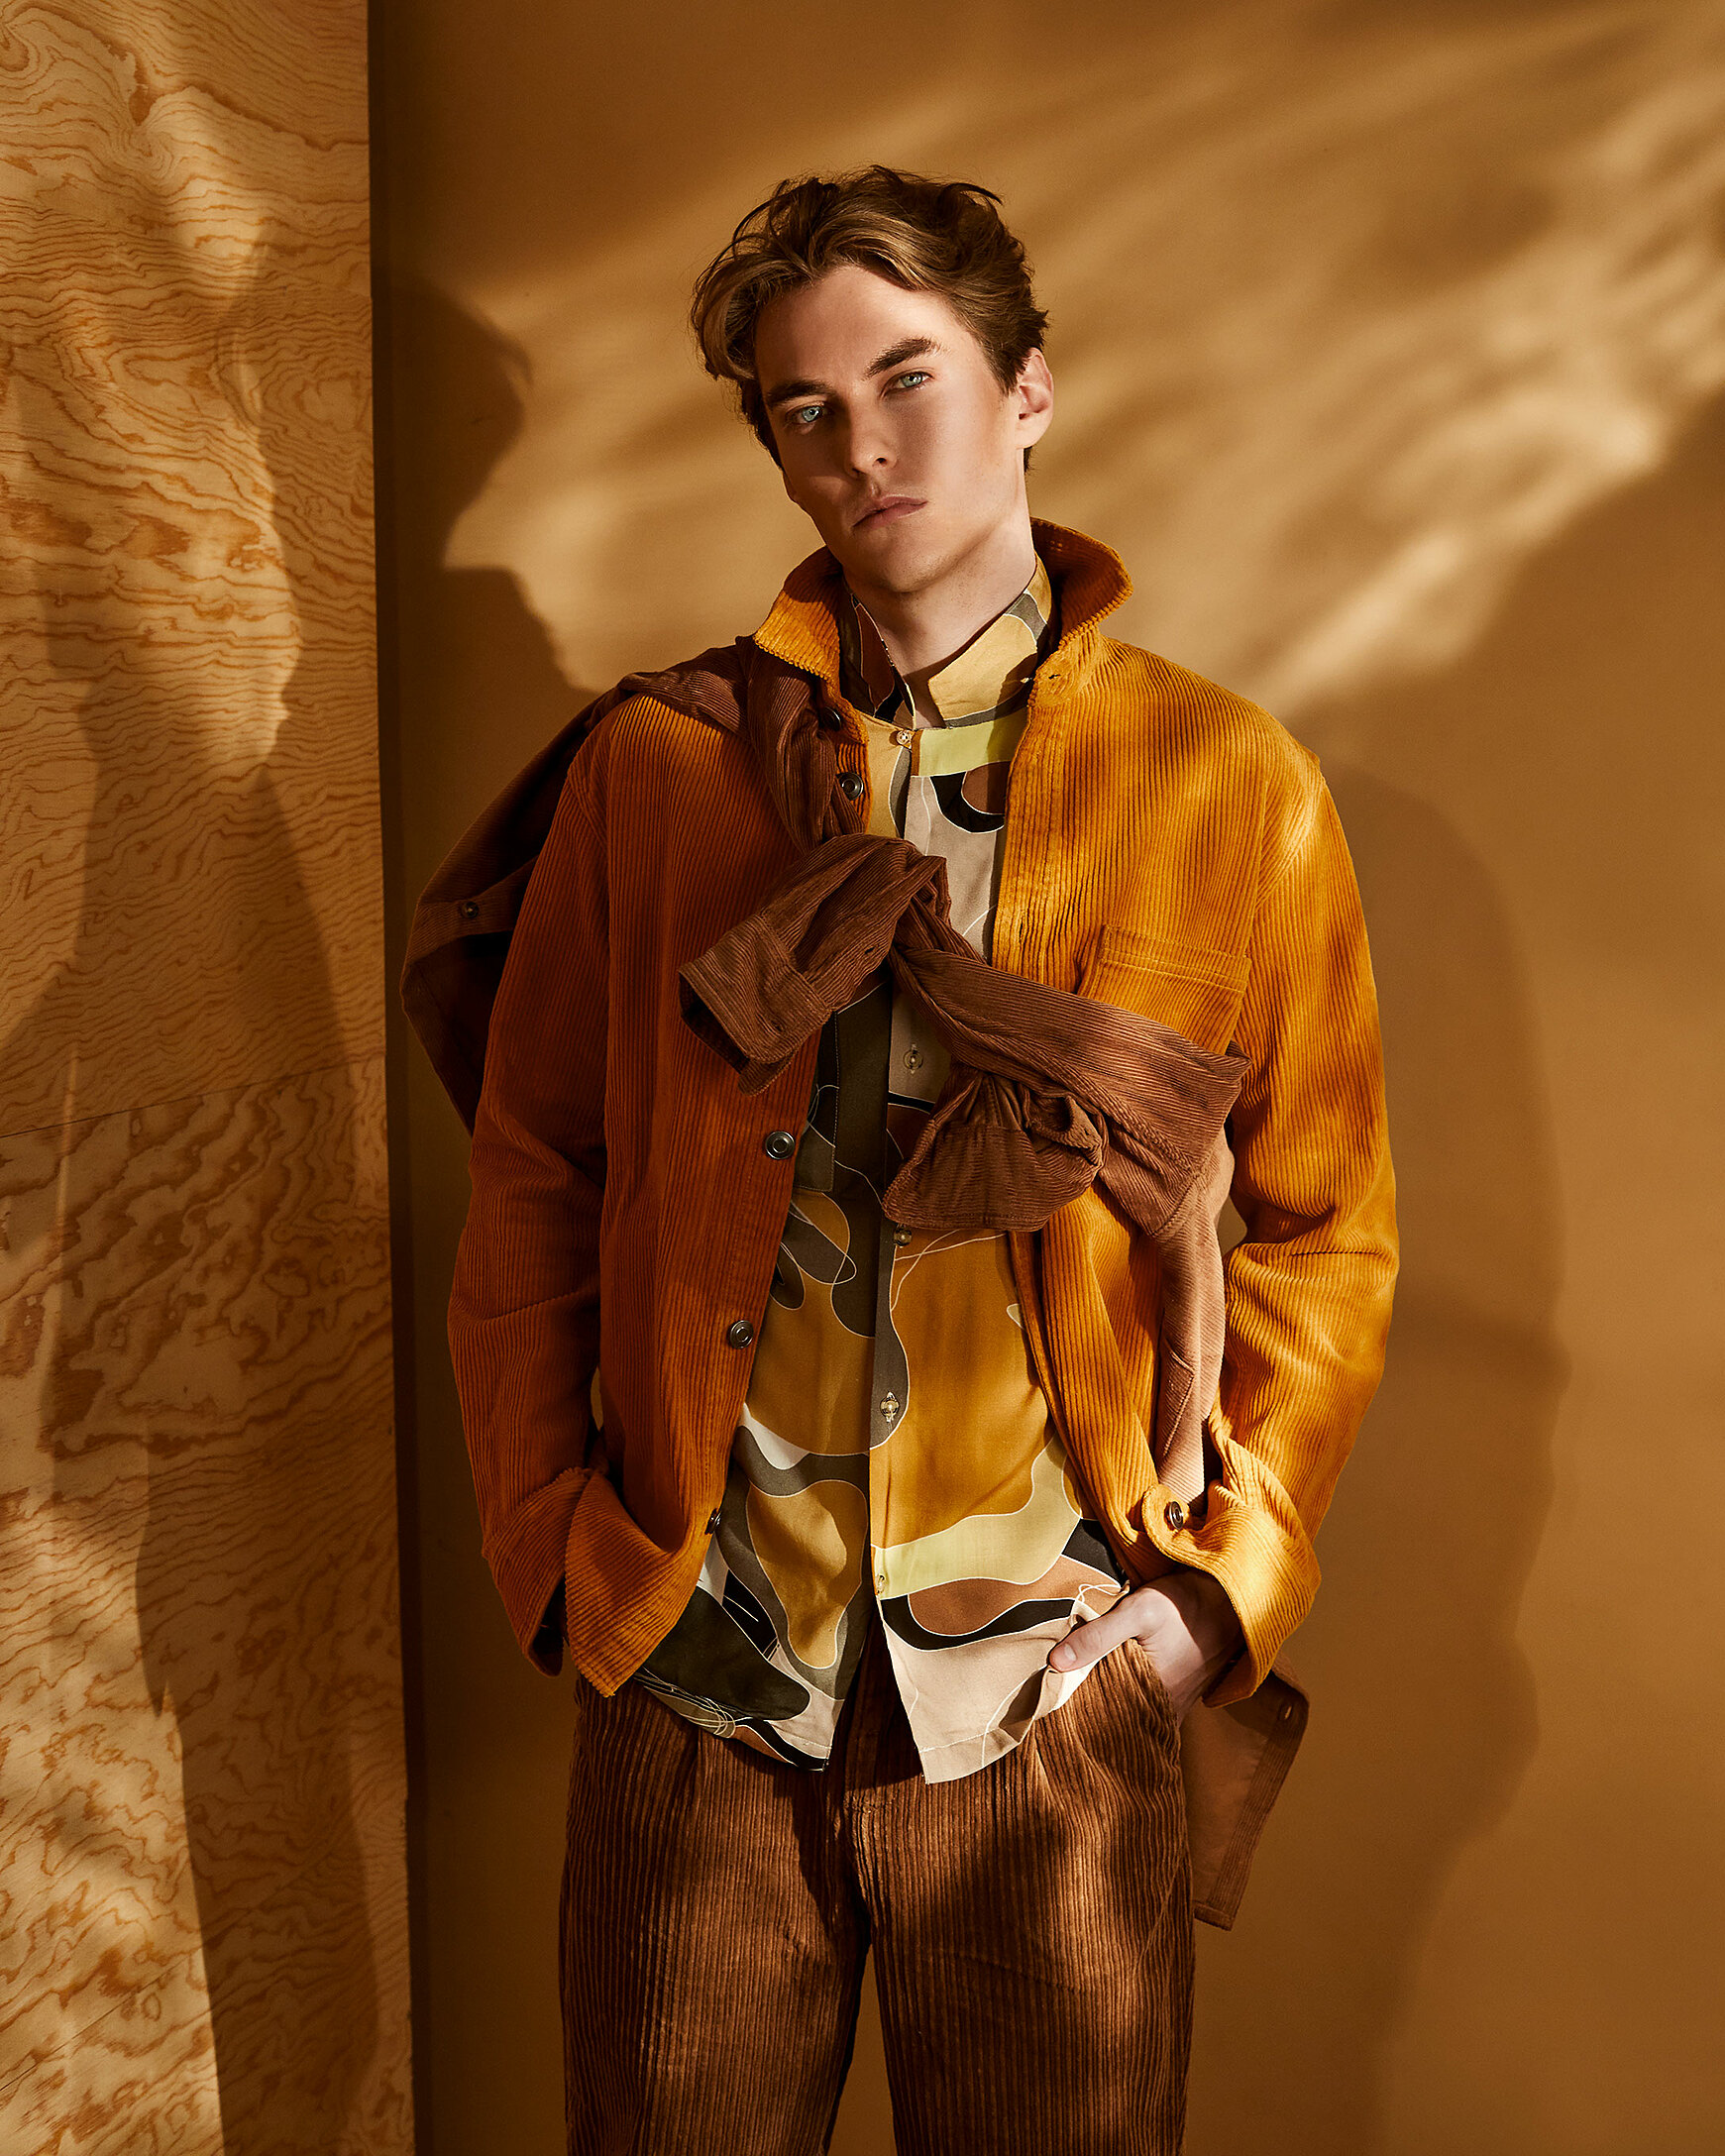 A male model with a cognac colored jacked and a patterned shirt. He wears brown cord trousers